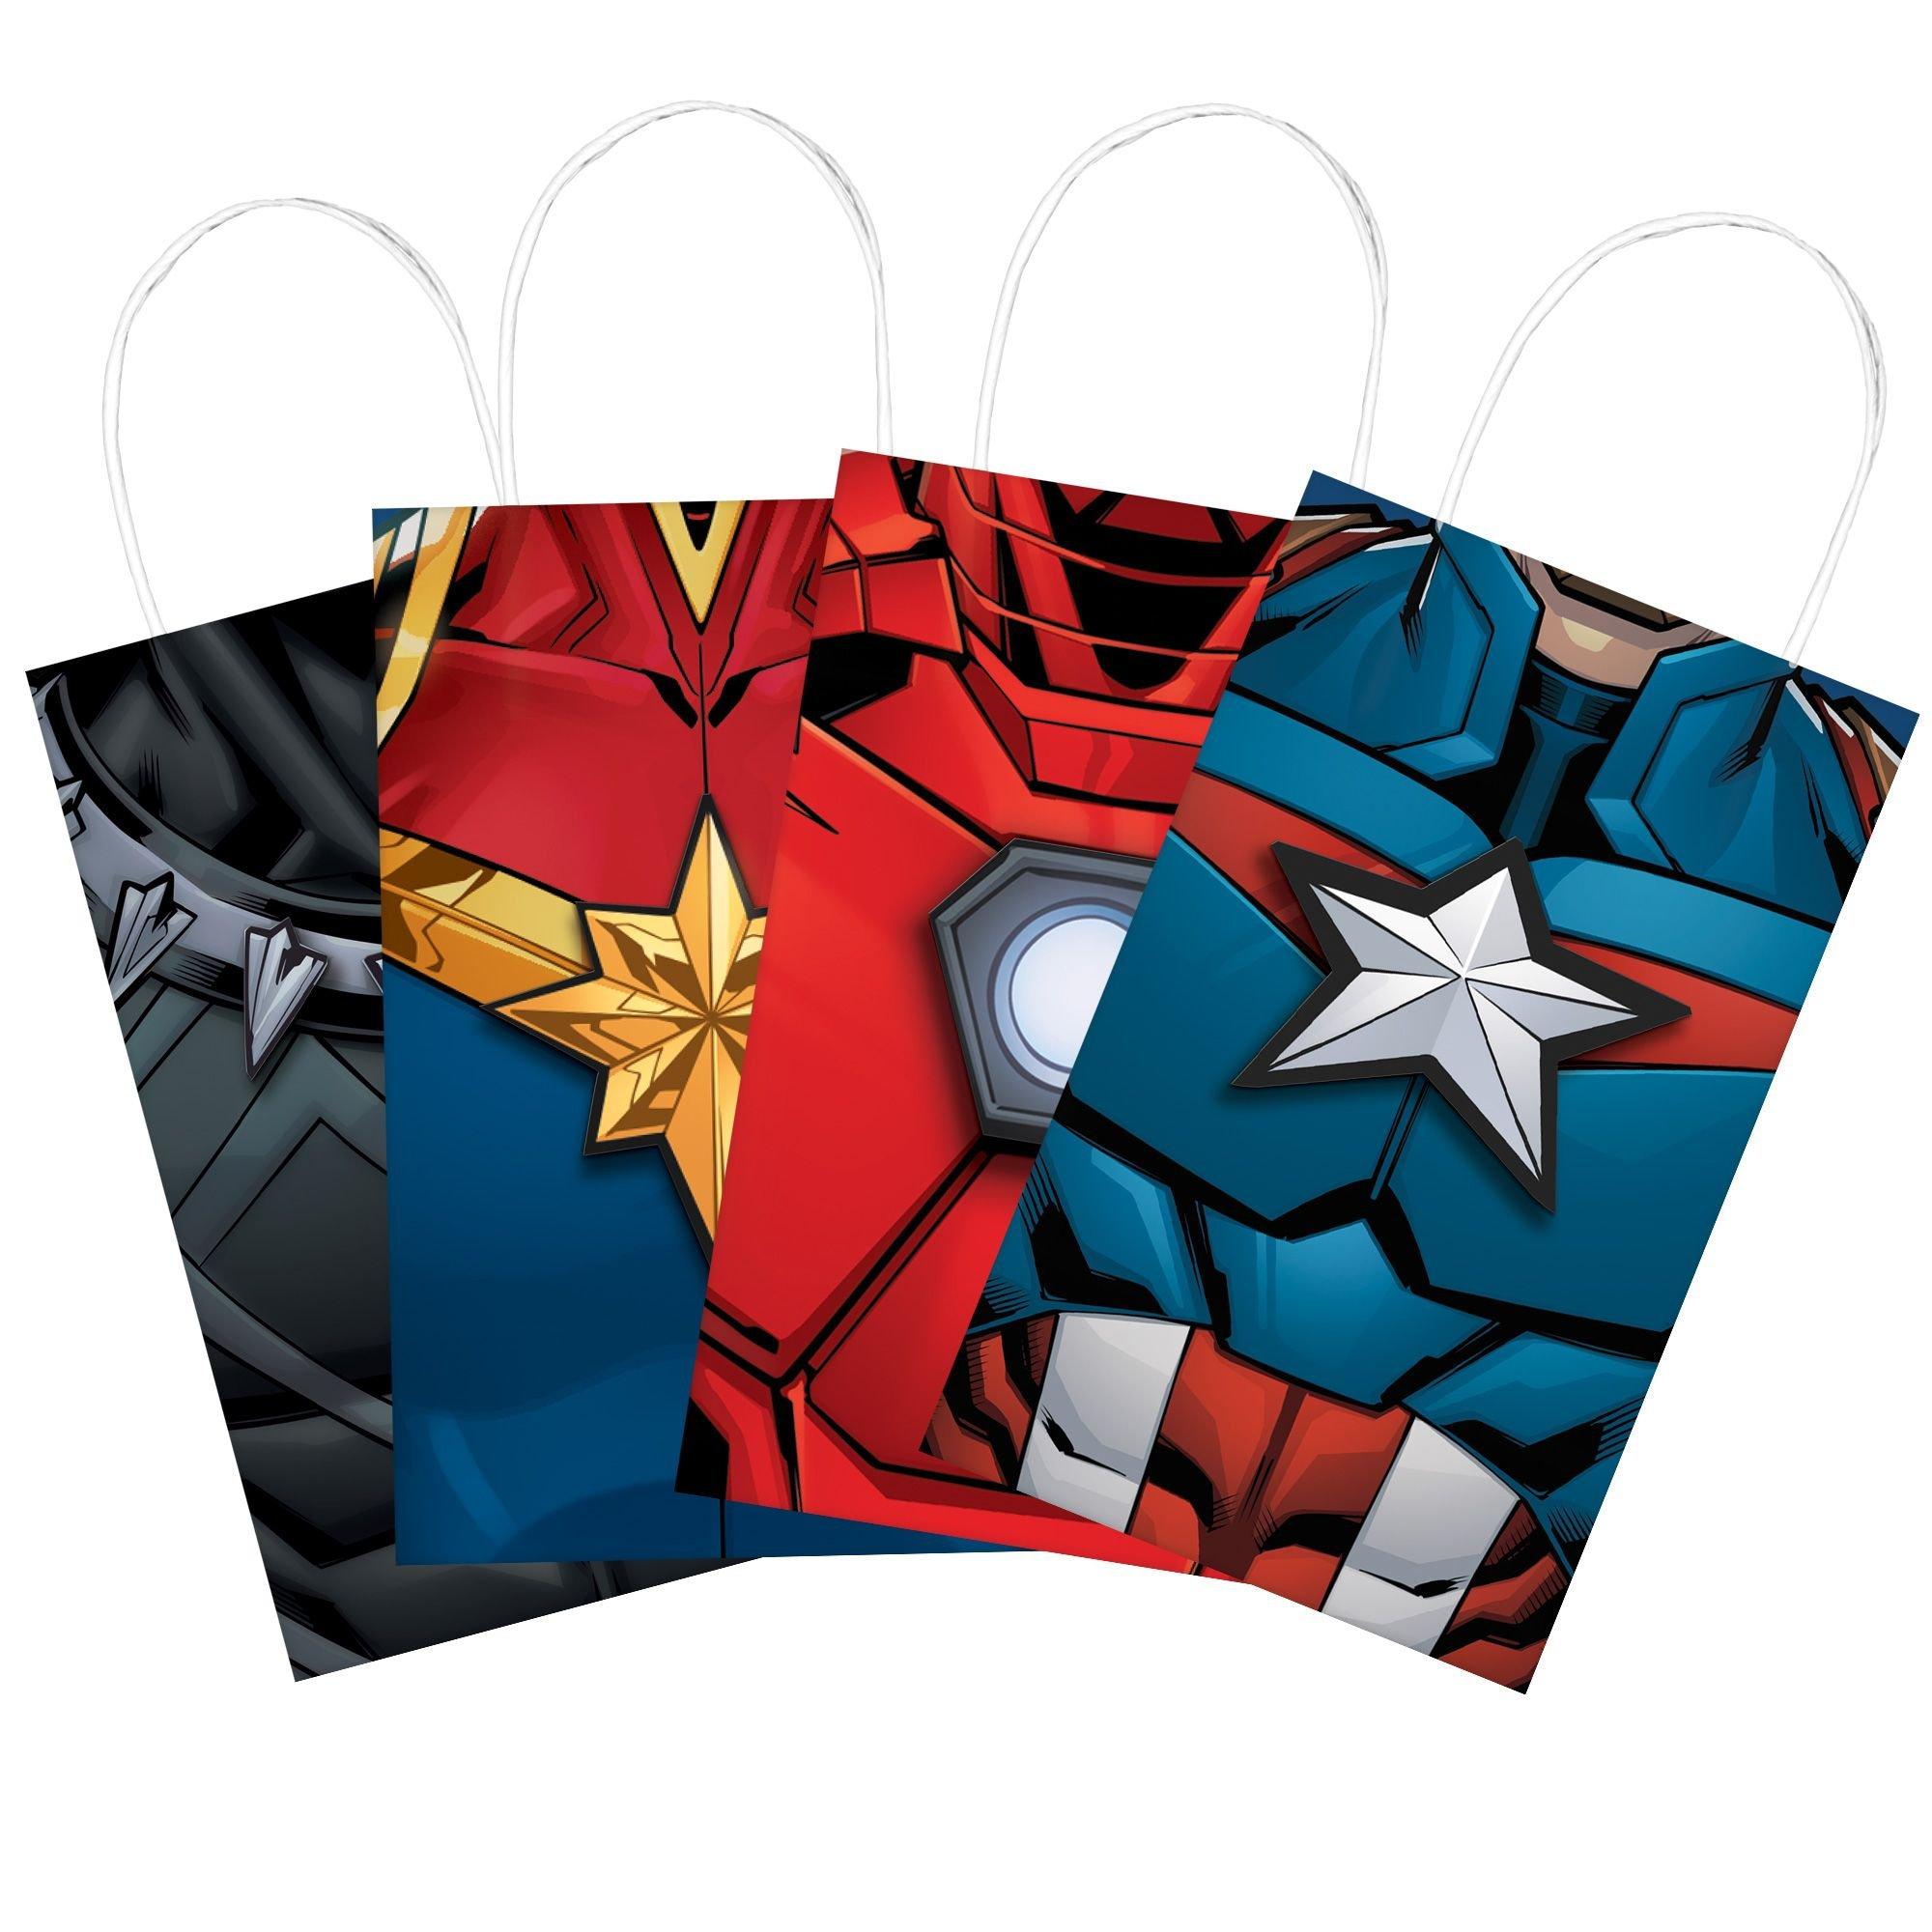 Inche16Pcs,Small Size Gift Paper Bags for Avengers and Superhero Themed Birthday Party,Paper Bag with Handls Bulks for Party Favors,Cookies,Bread